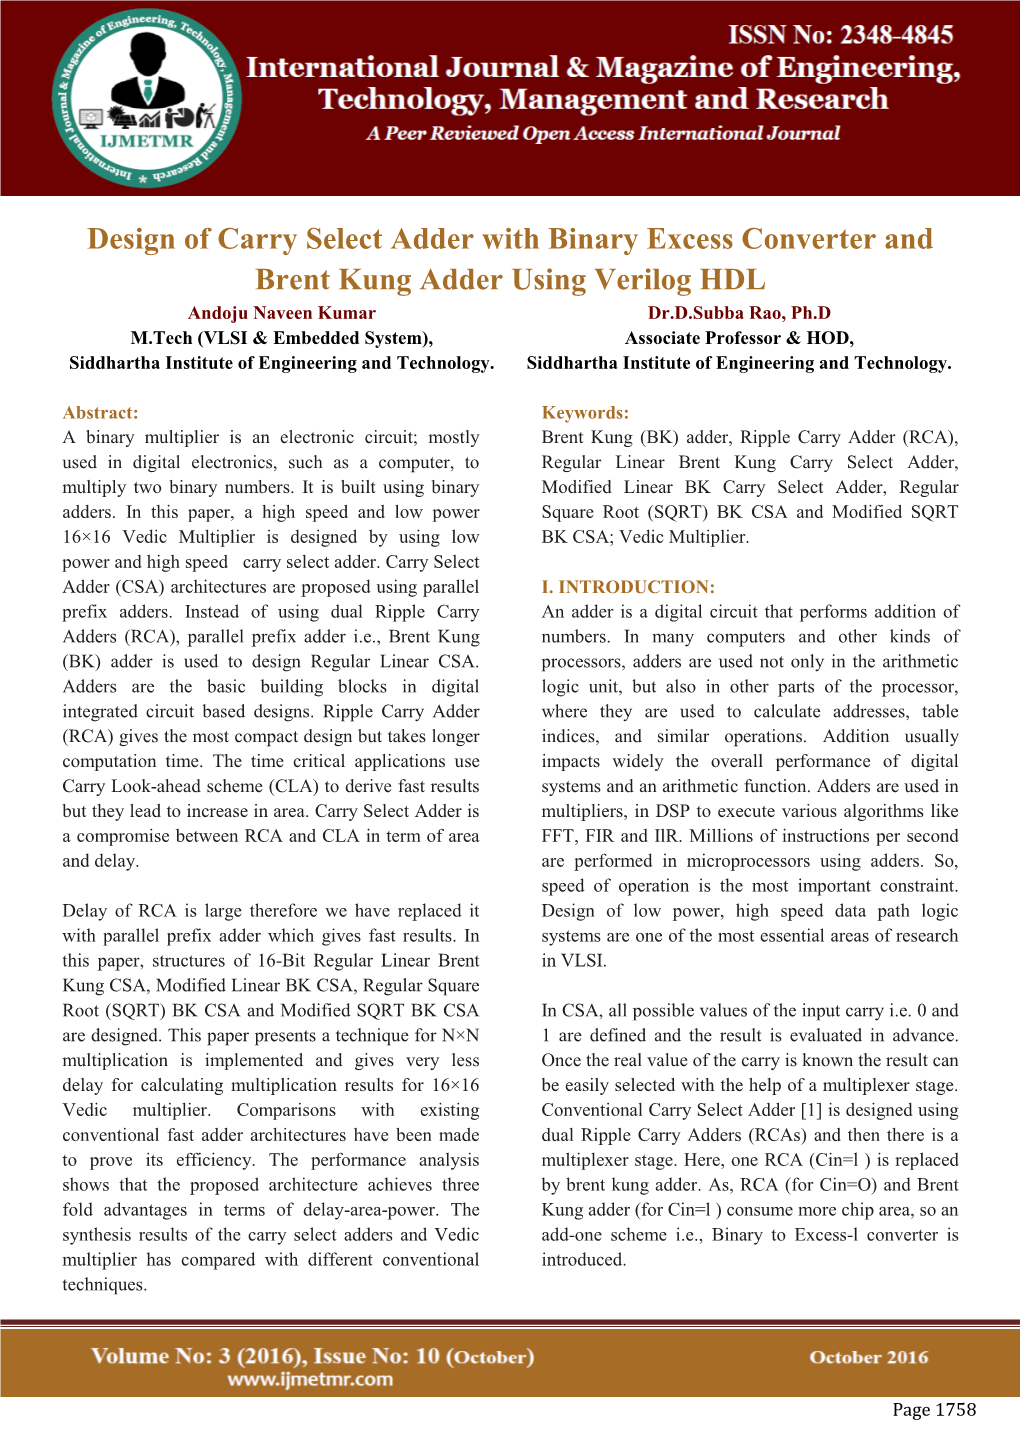 Design of Carry Select Adder with Binary Excess Converter and Brent